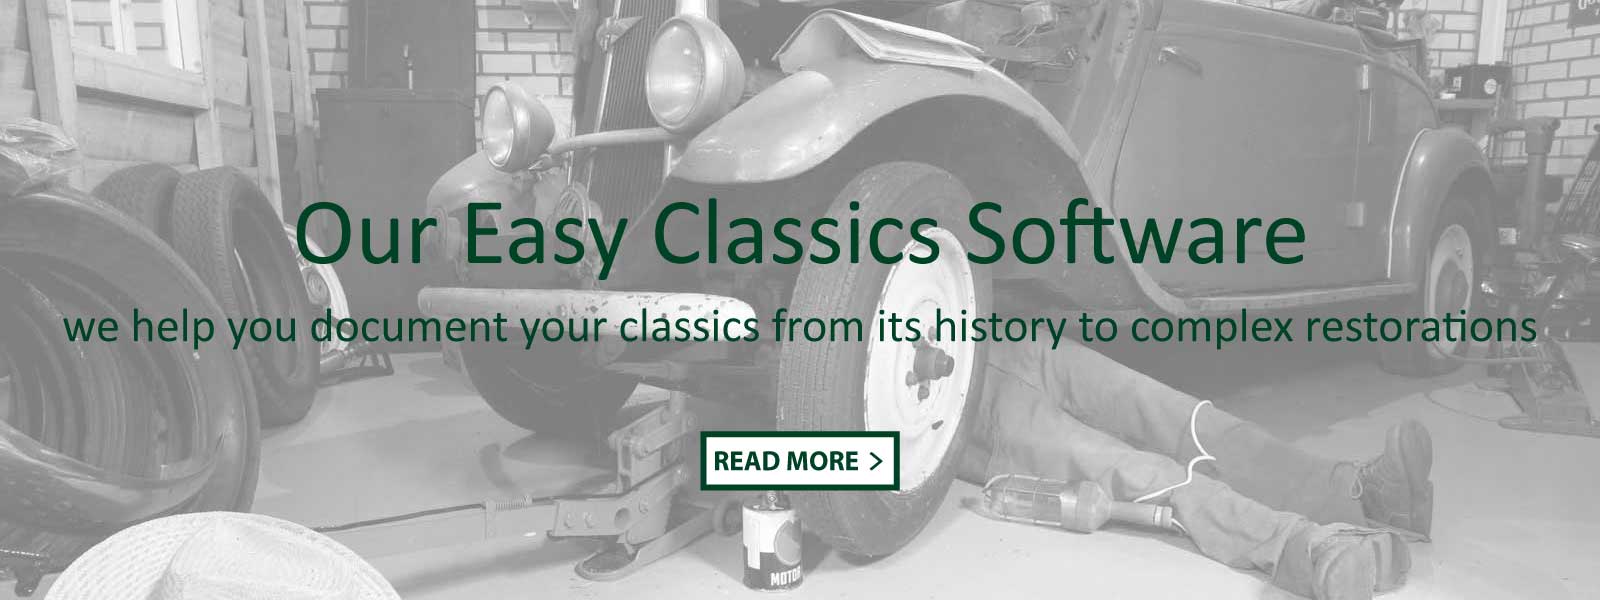 our easy classics software